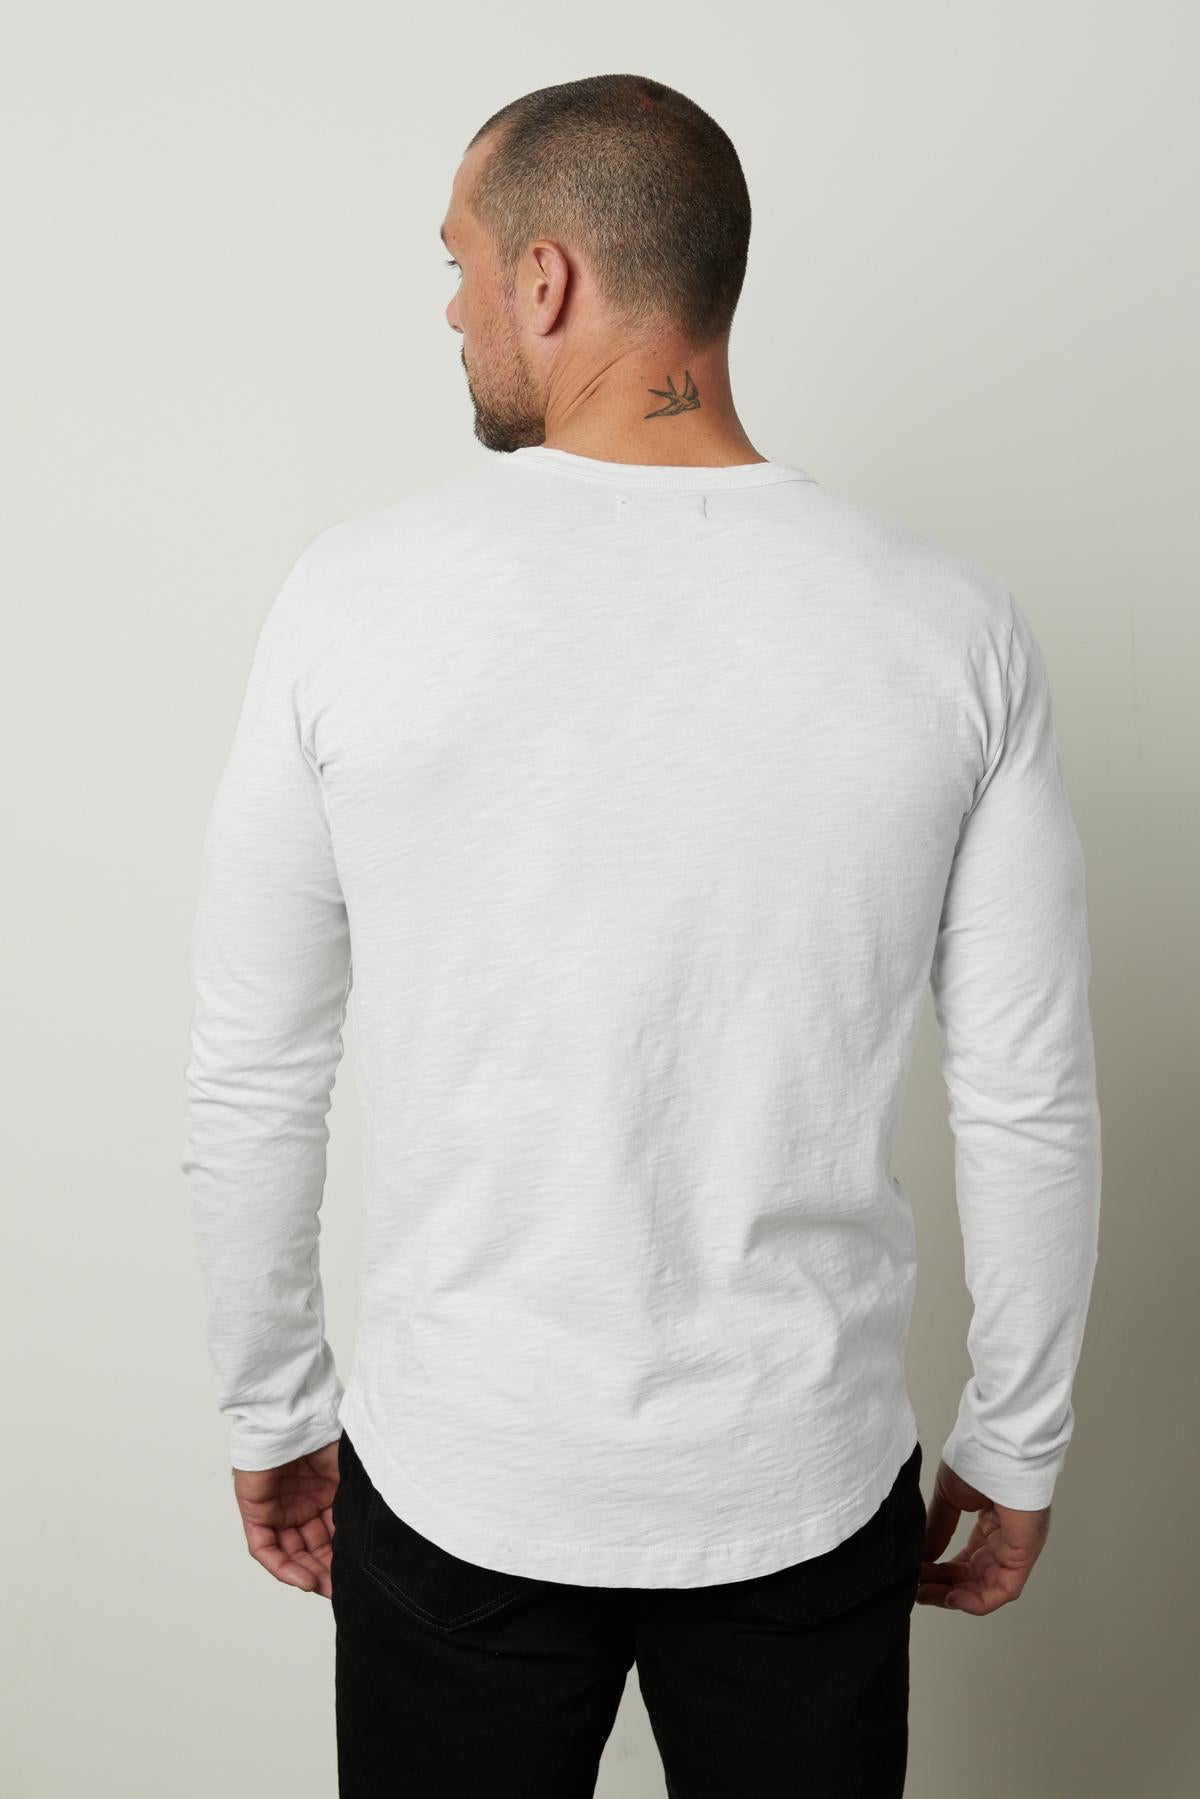   The back view of a man wearing a white Velvet by Graham & Spencer KAI CREW NECK TEE, showcasing its flawless fit. 